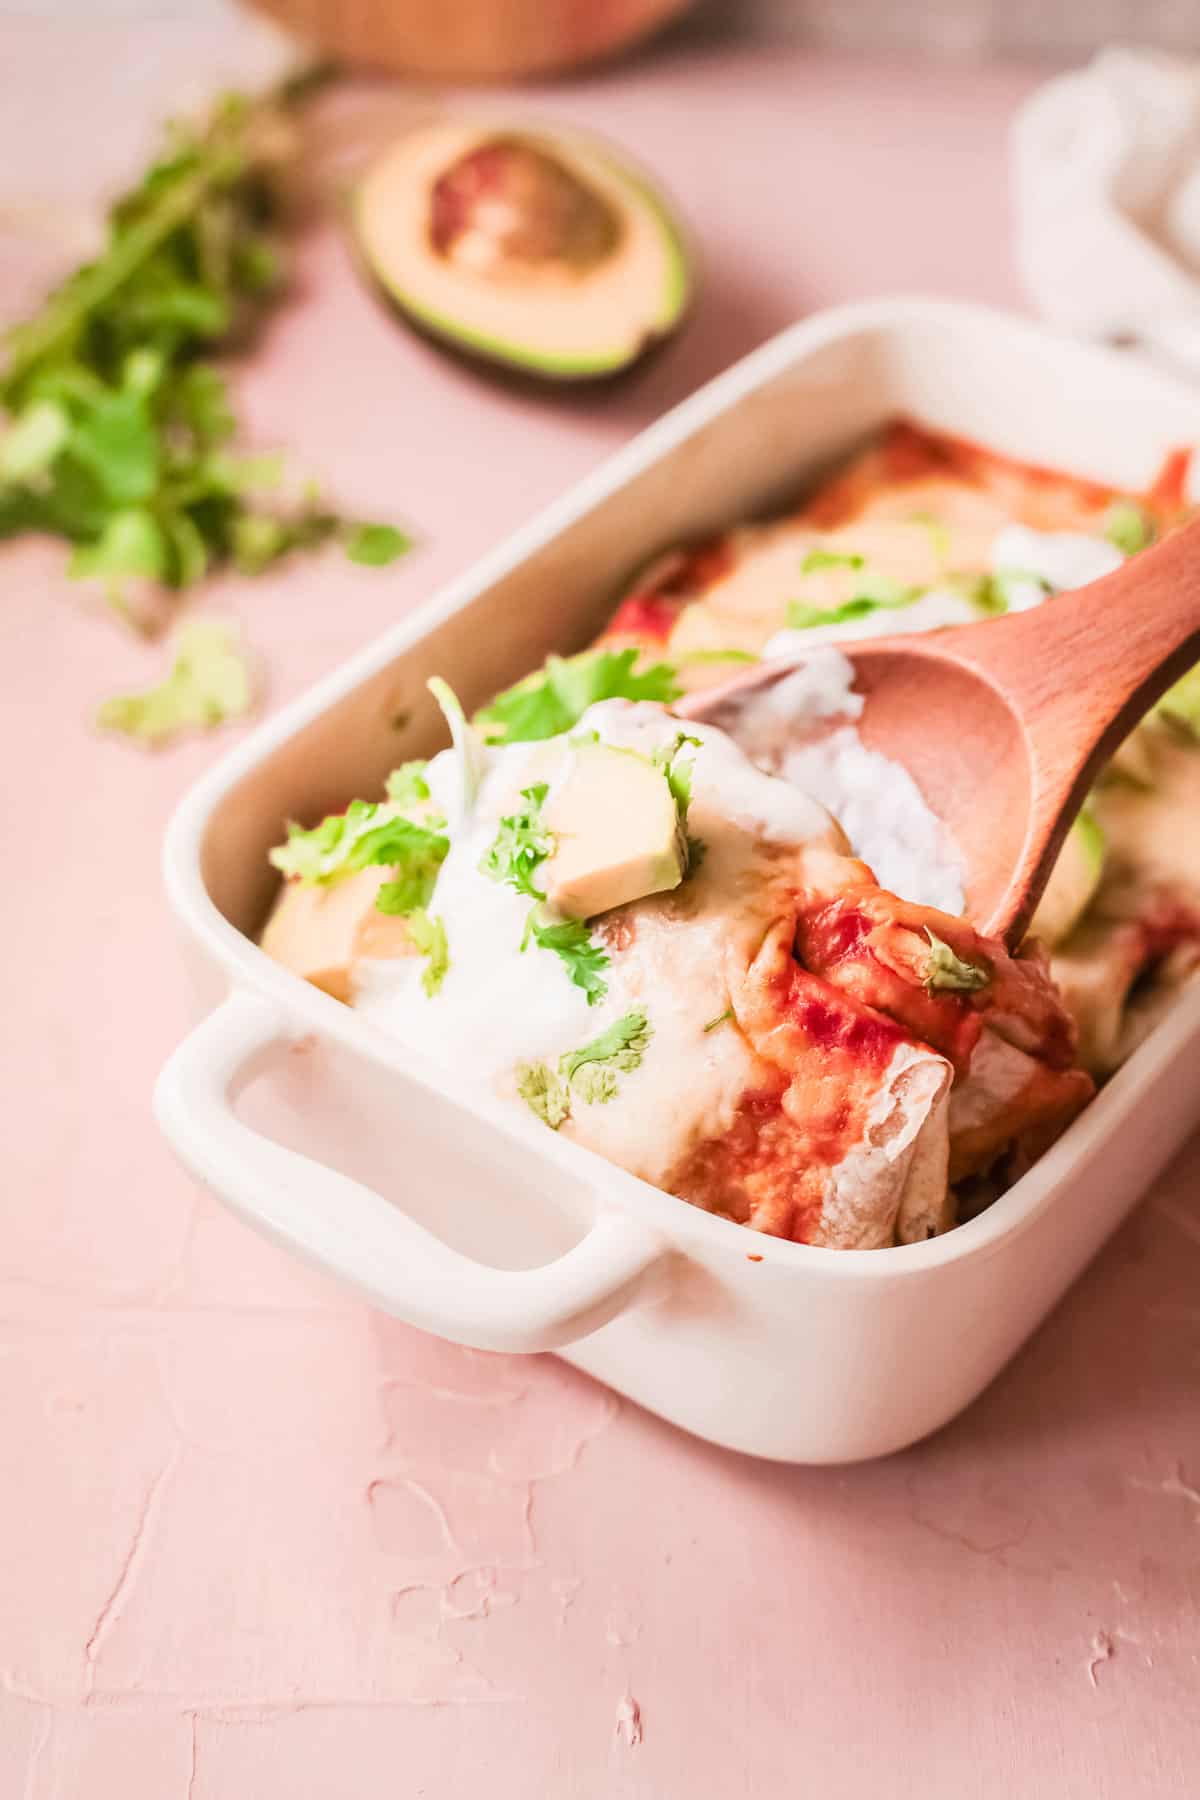 the completed slow cooker chicken enchiladas in a white baking dish